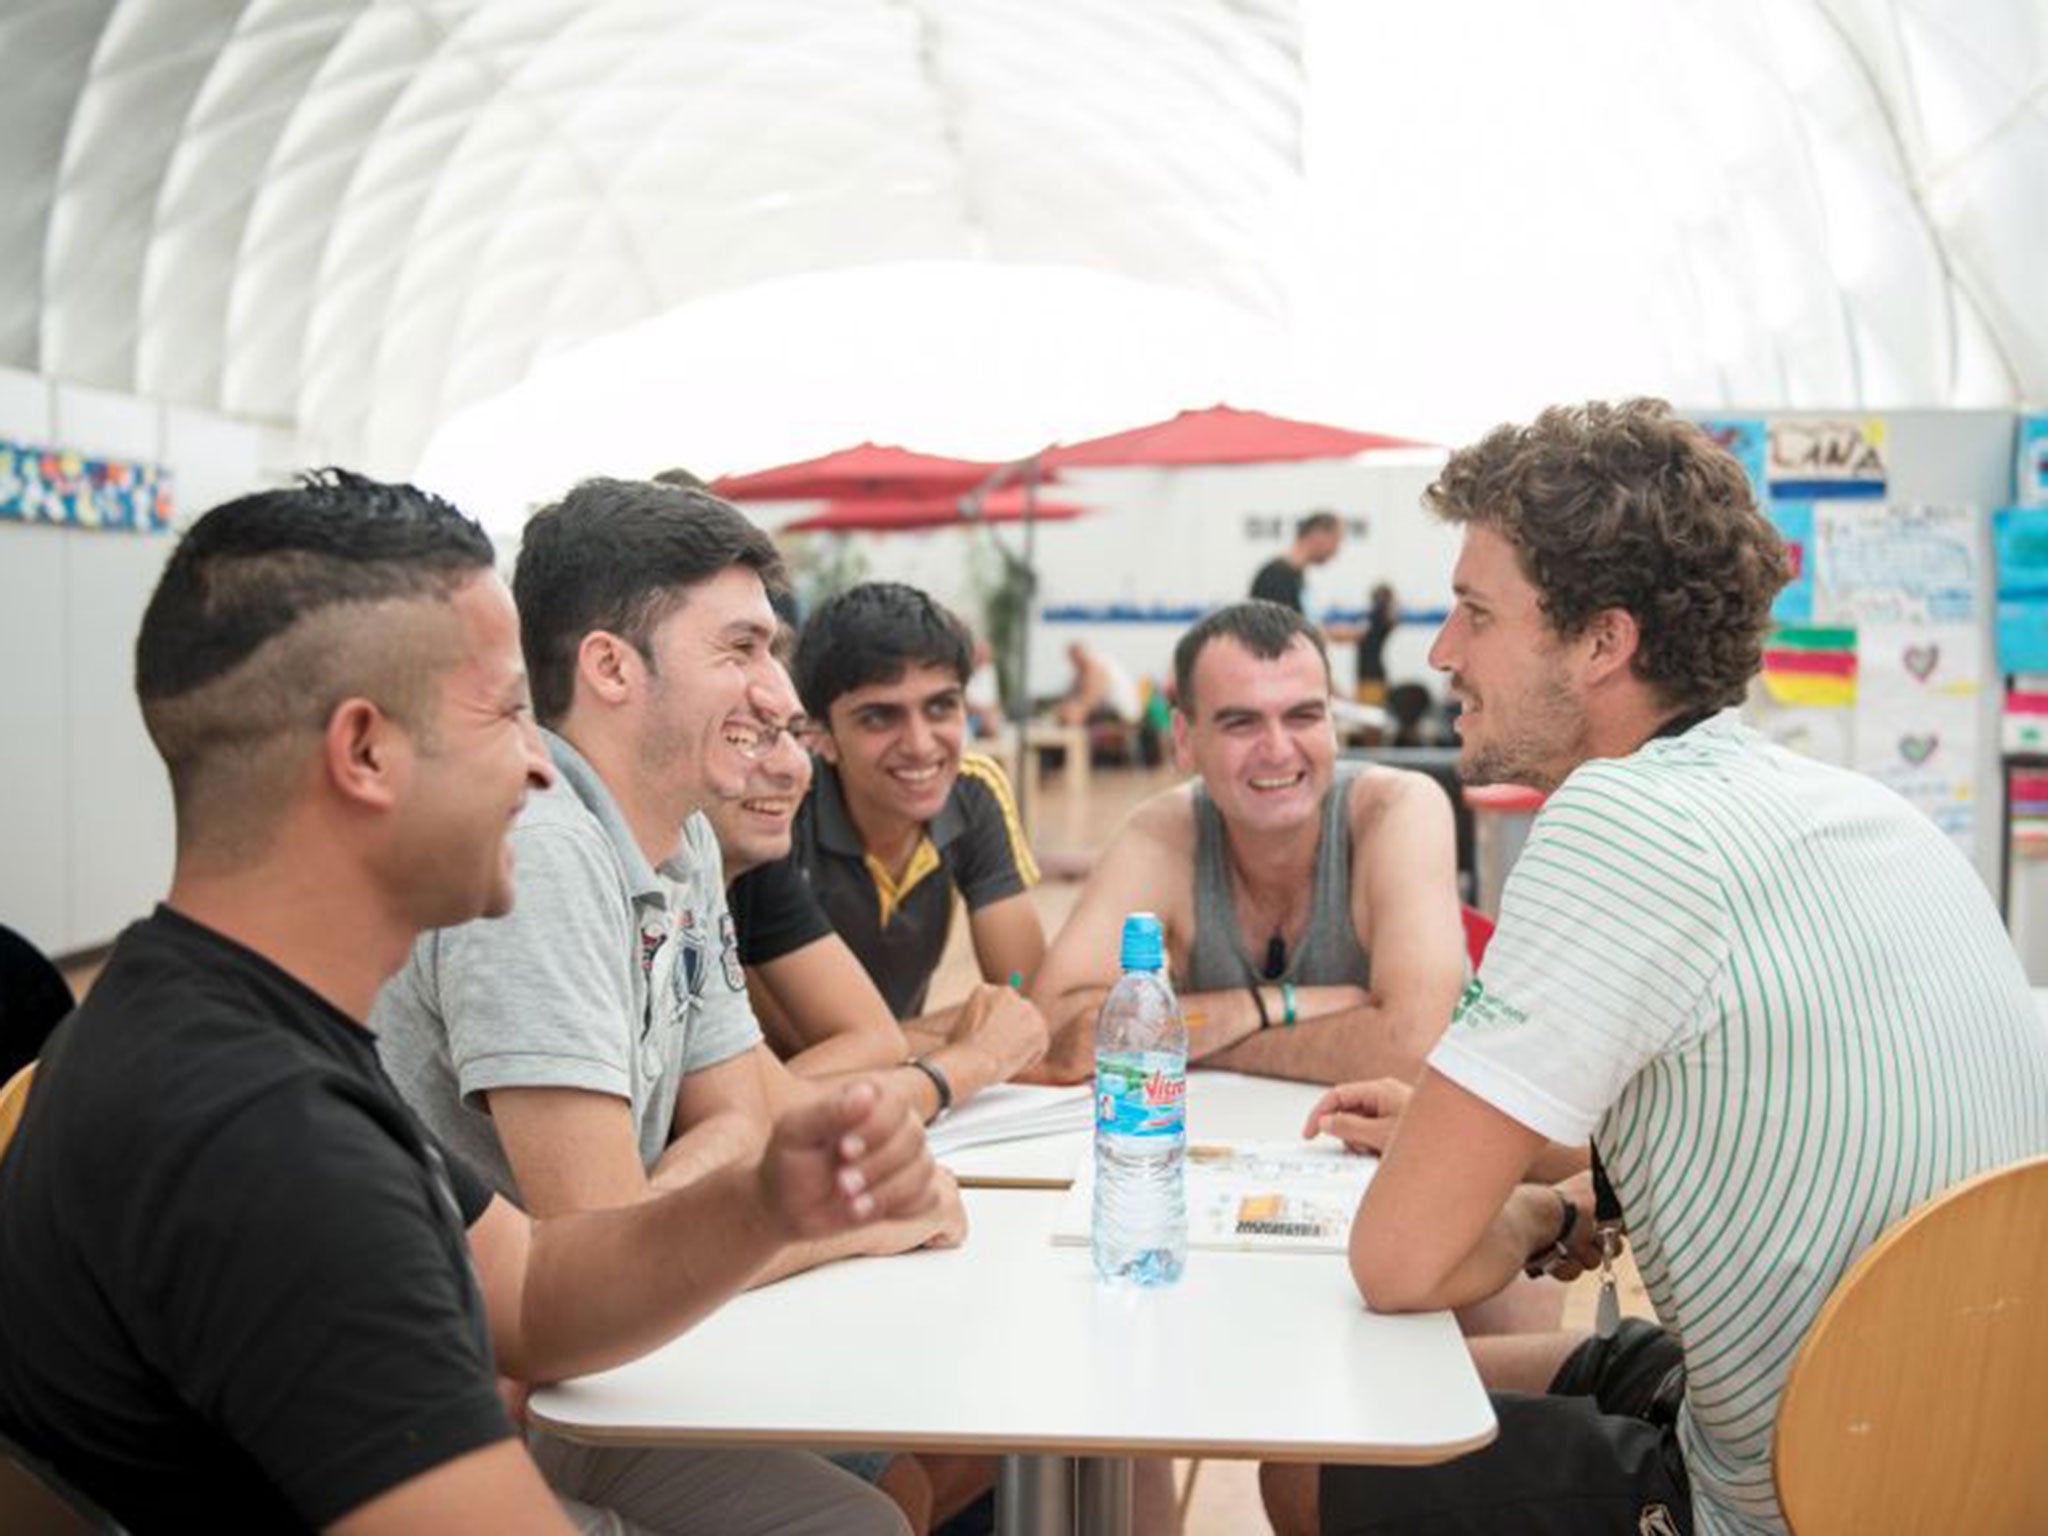 German trainee Adam (R) conducts a German lesson for migrants in an emergency accommodation shelter in a big air-inflated tent for asylum applicants in Berlin